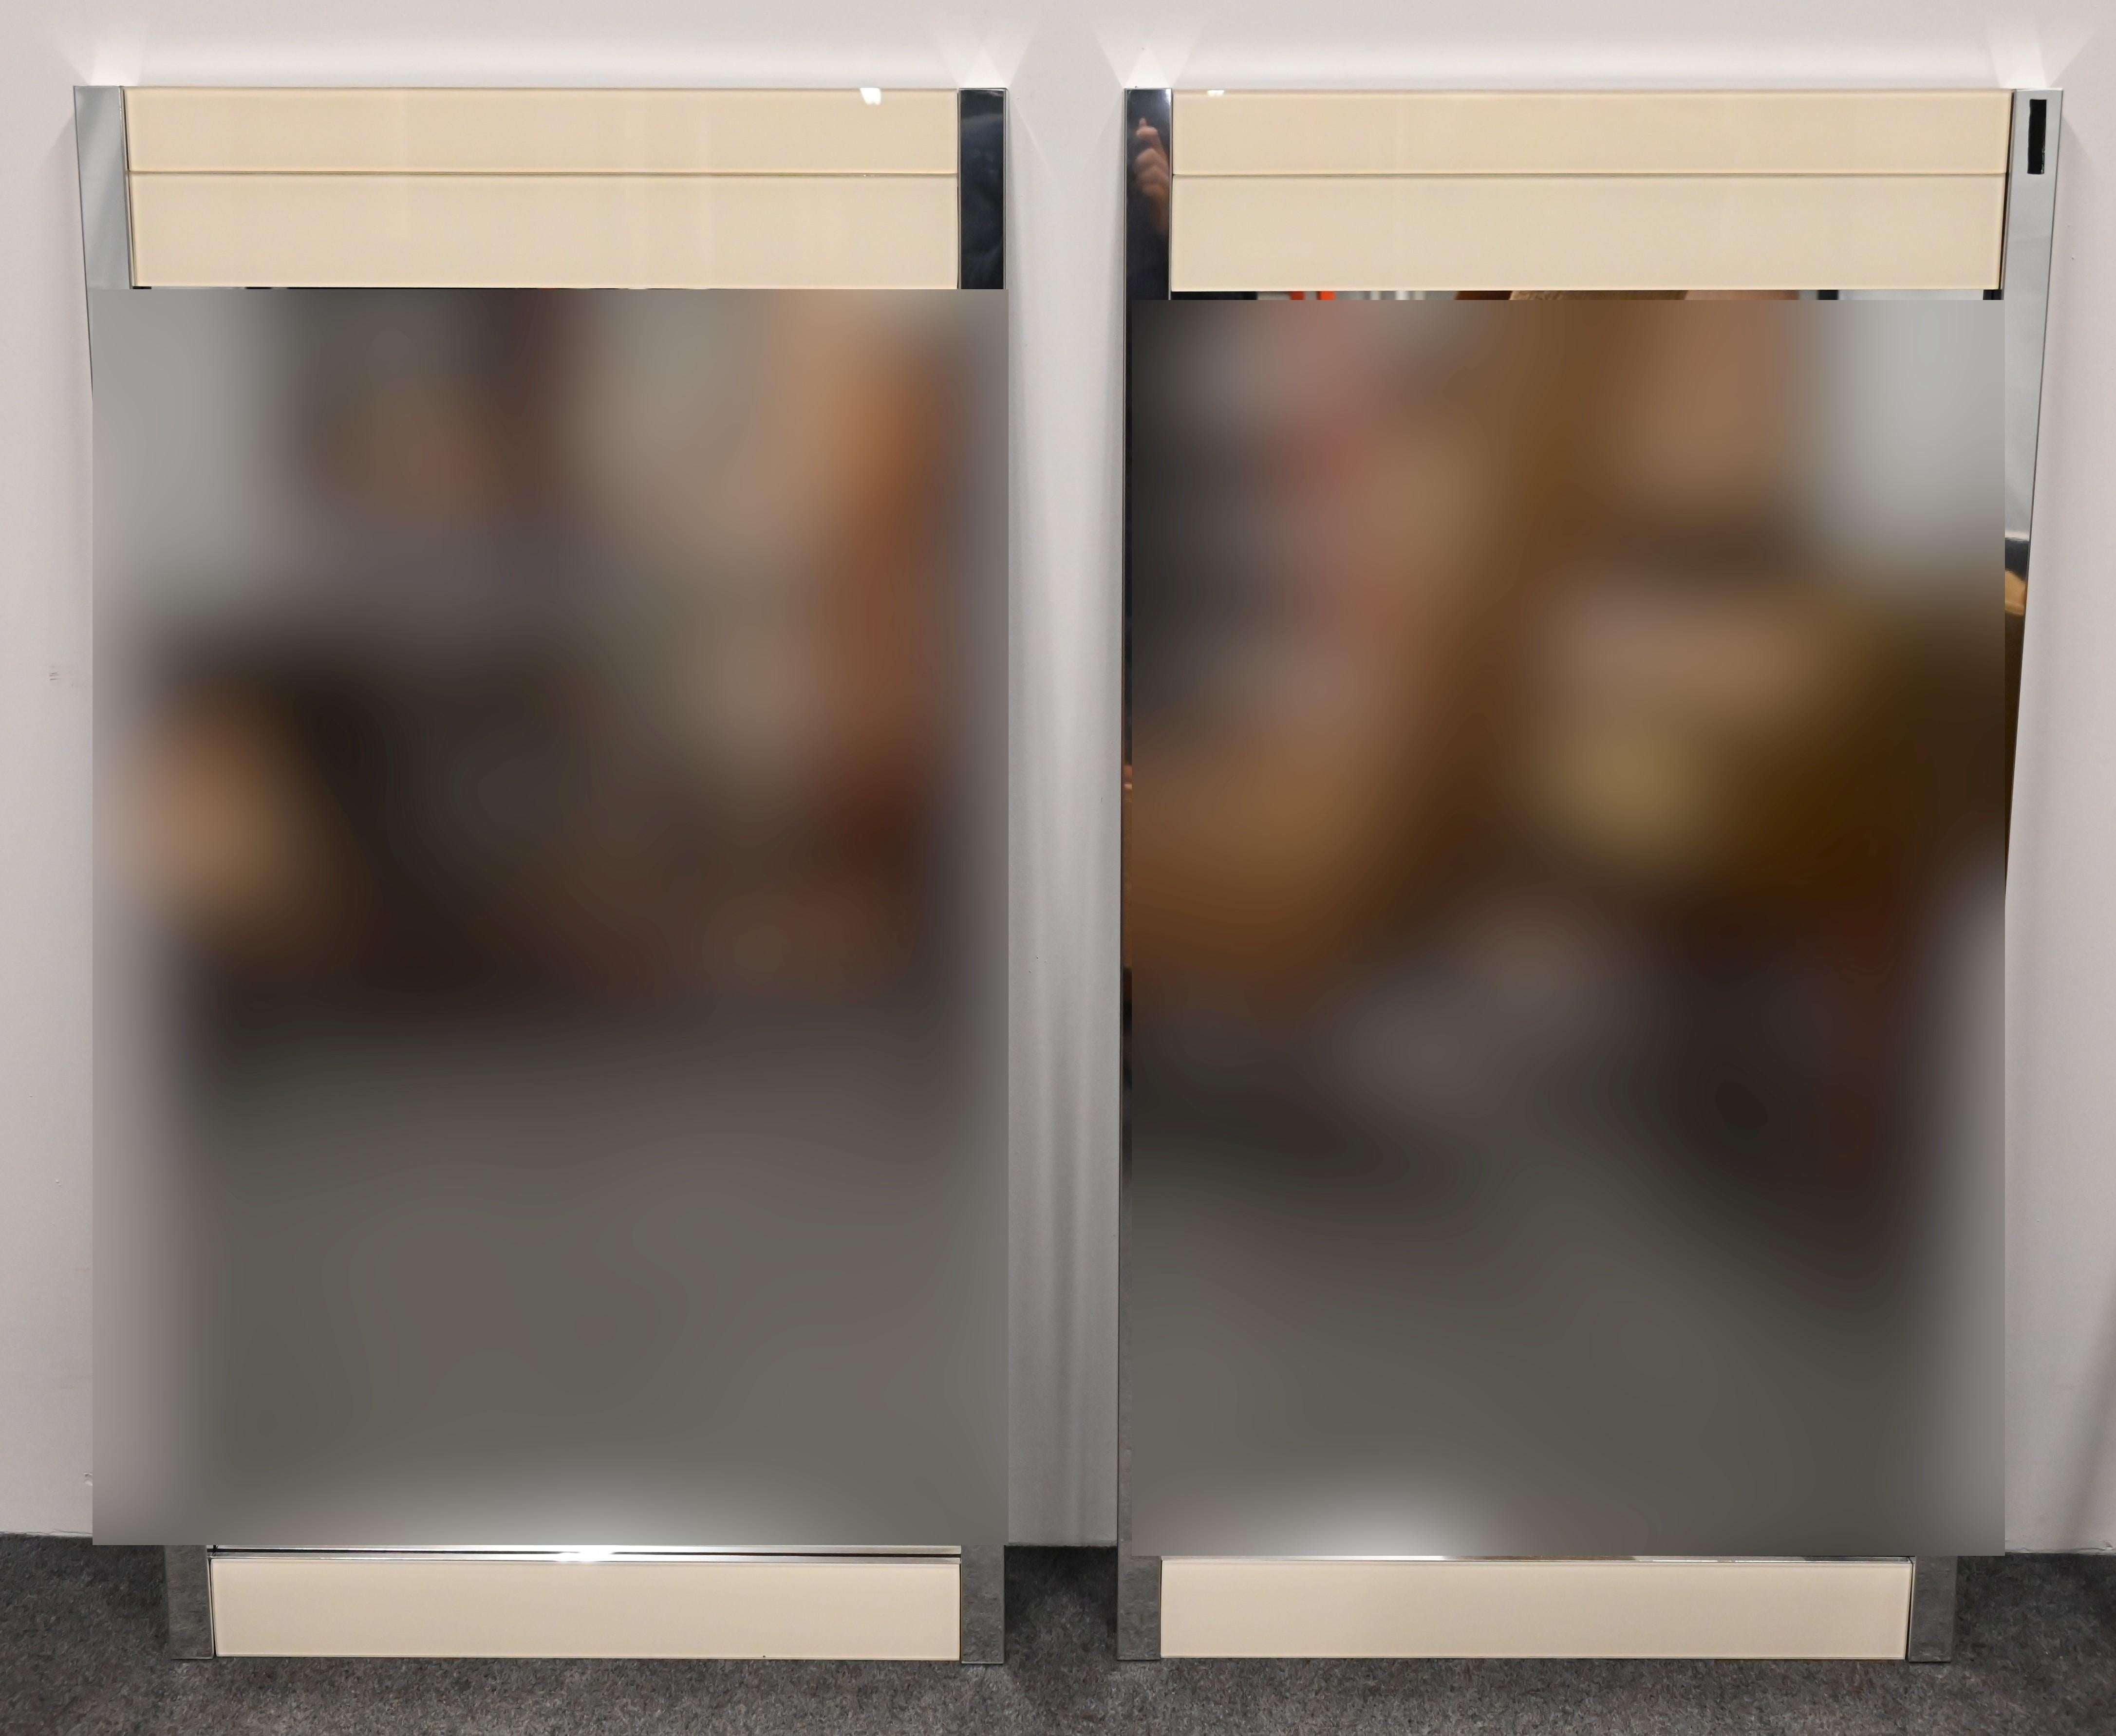 A great pair of Chrome and Glass Mirrors with creme mirror accents by Ello. The mirrors are a great minimalist look for that simple streamlined interior. They would work in any Mid-Century Modern or Contemporary home. The mirrors are in very good